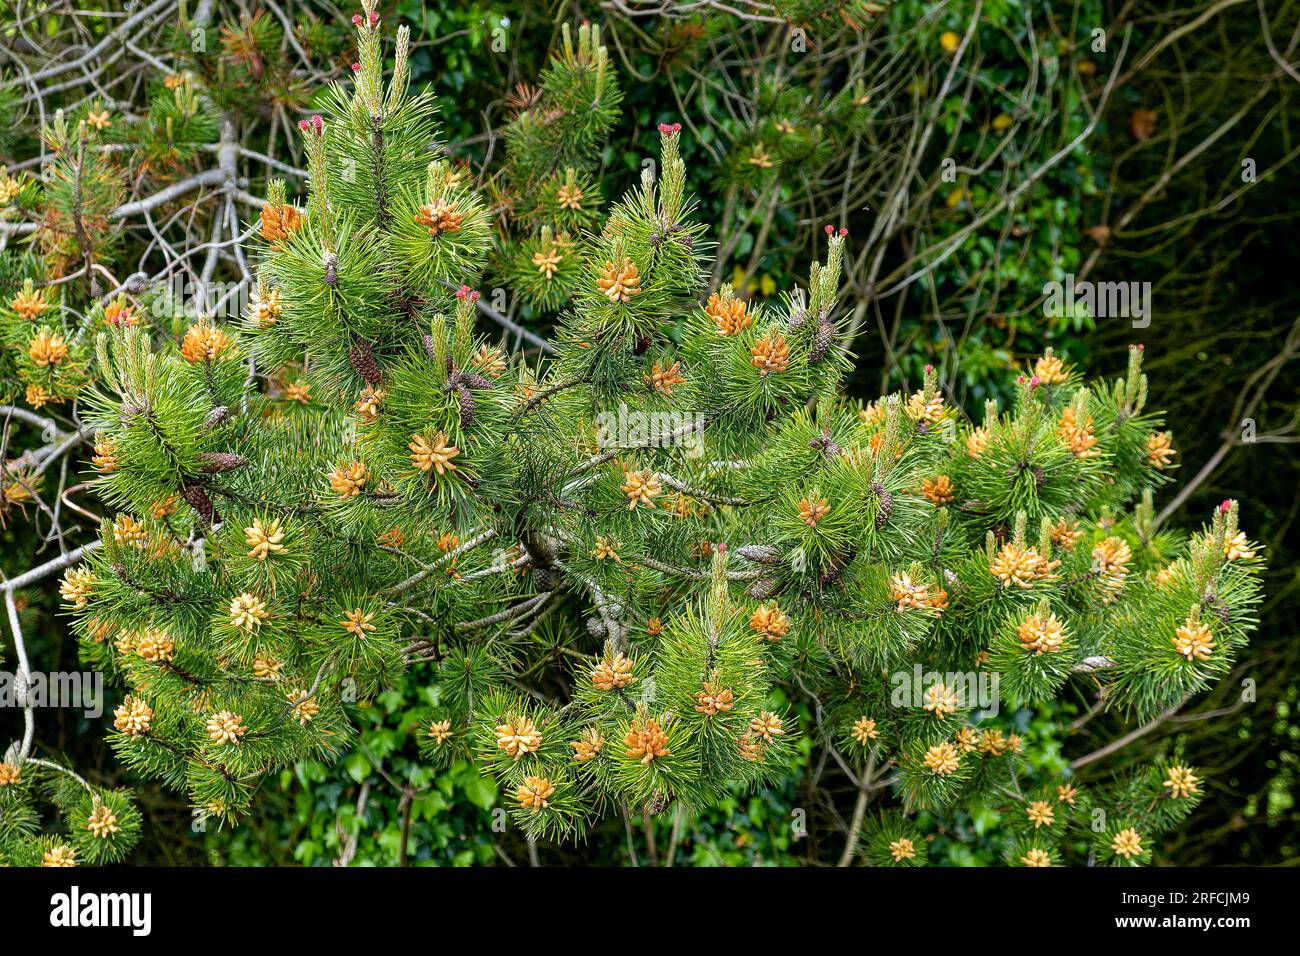 Mugo pine tree a species native to Europe with its small pine cones visible early before summer Stock Photo